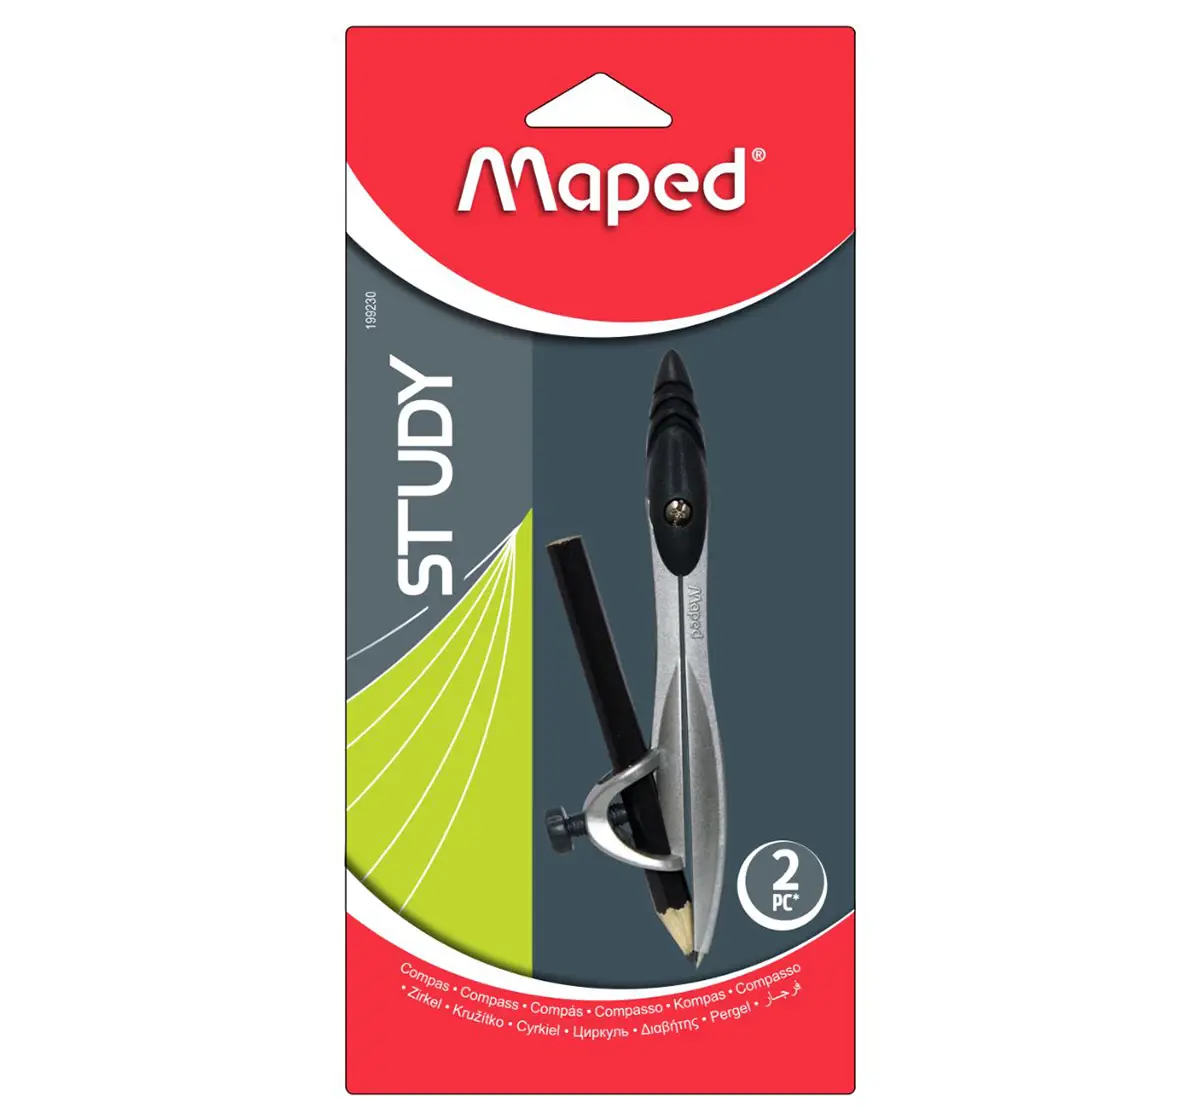 Maped Compass Study Holder With Pencil, 7Y+ (Grey)